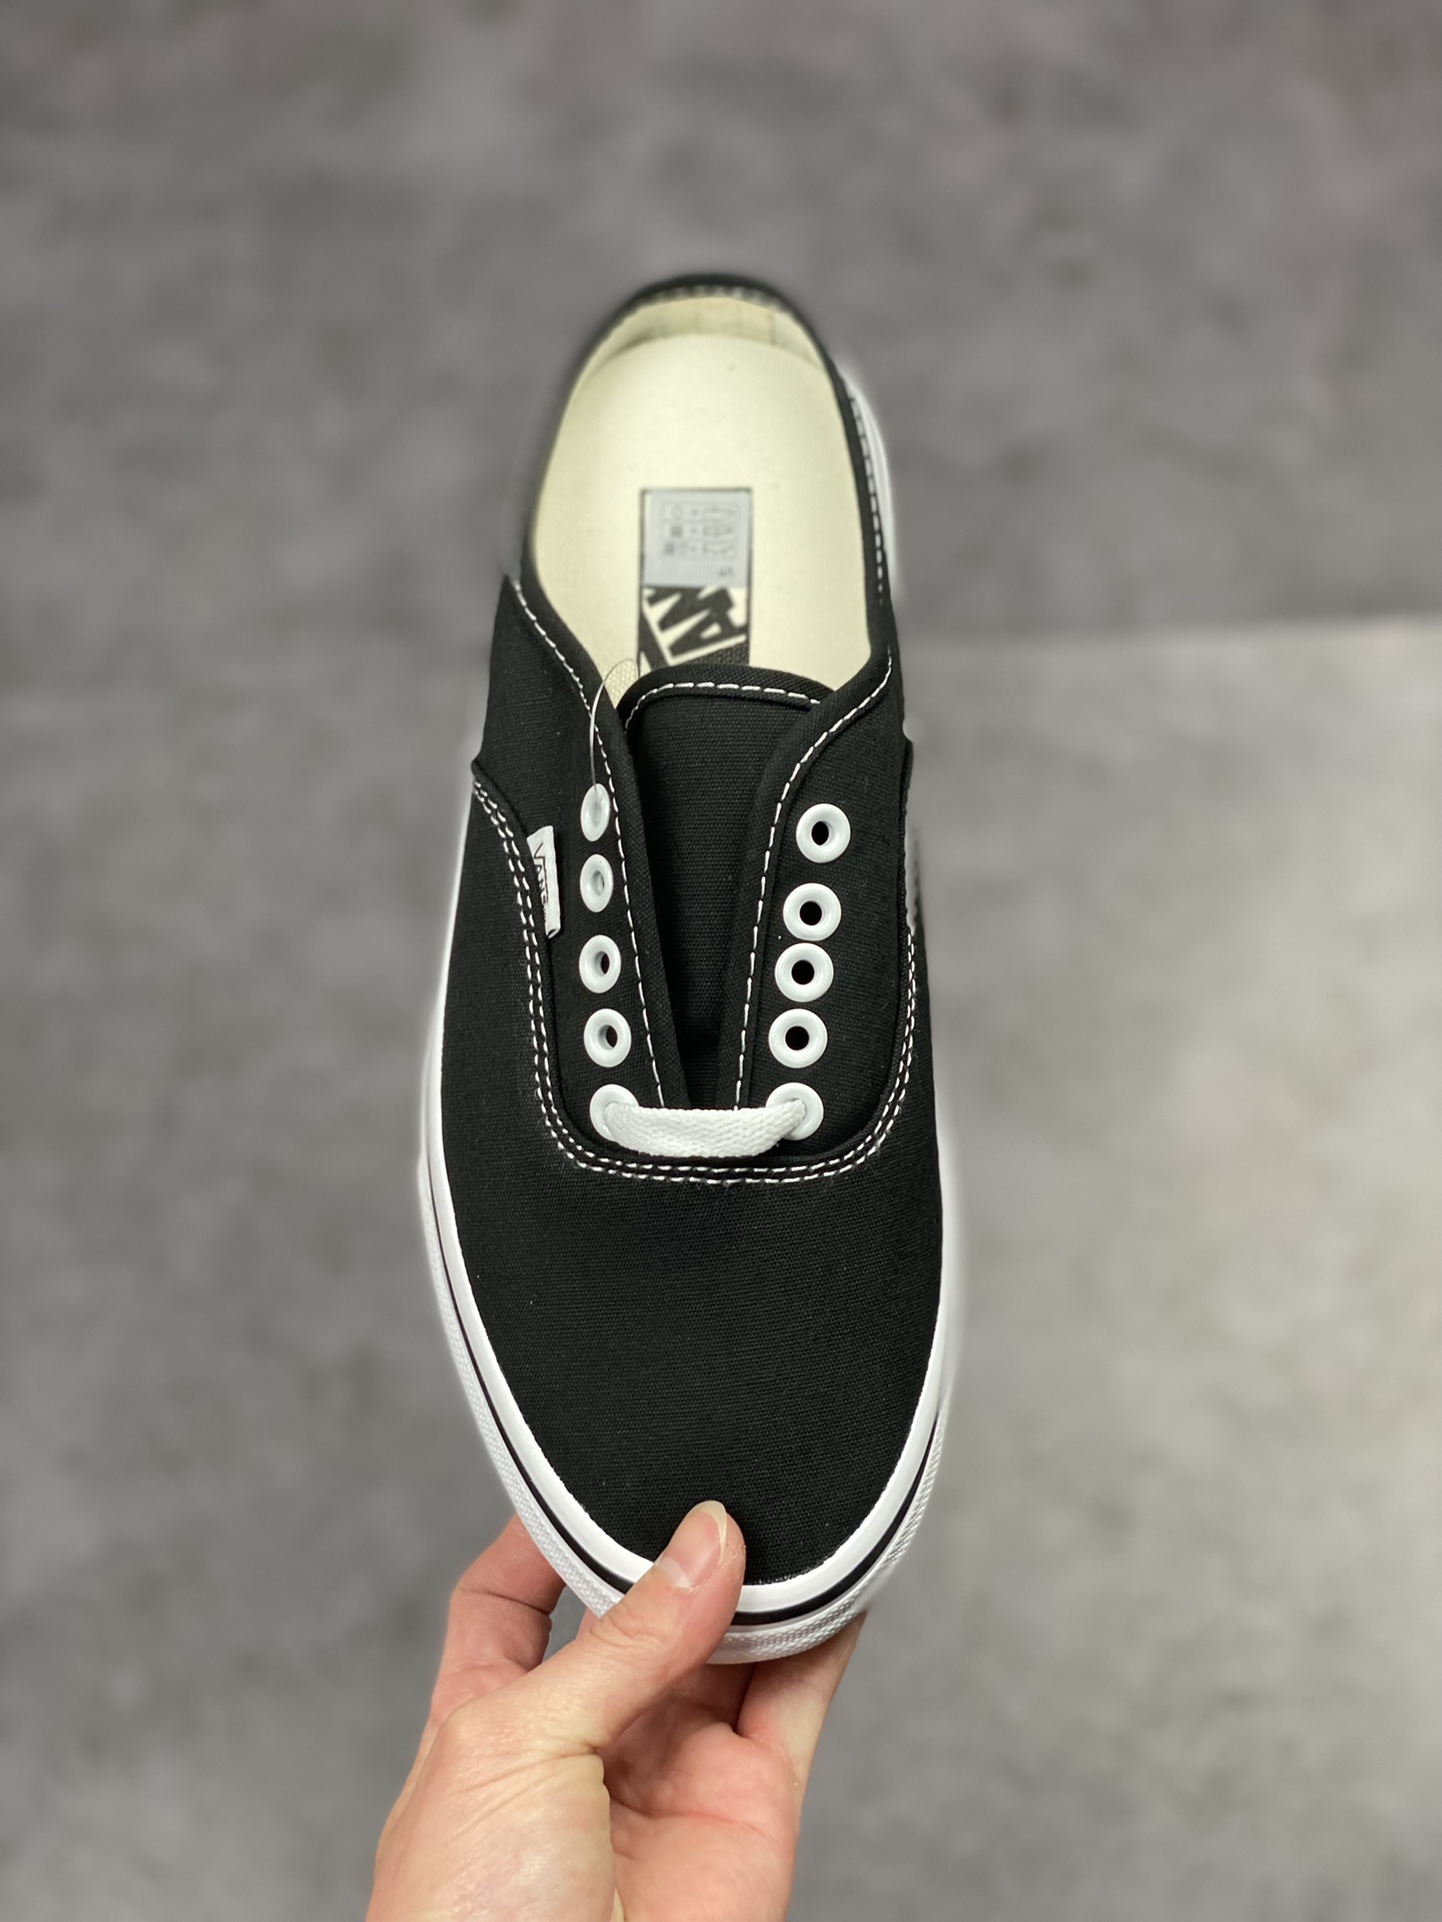 VANS Vans AUT classic black and white low-top half-drag men's and women's canvas shoes and sneakers